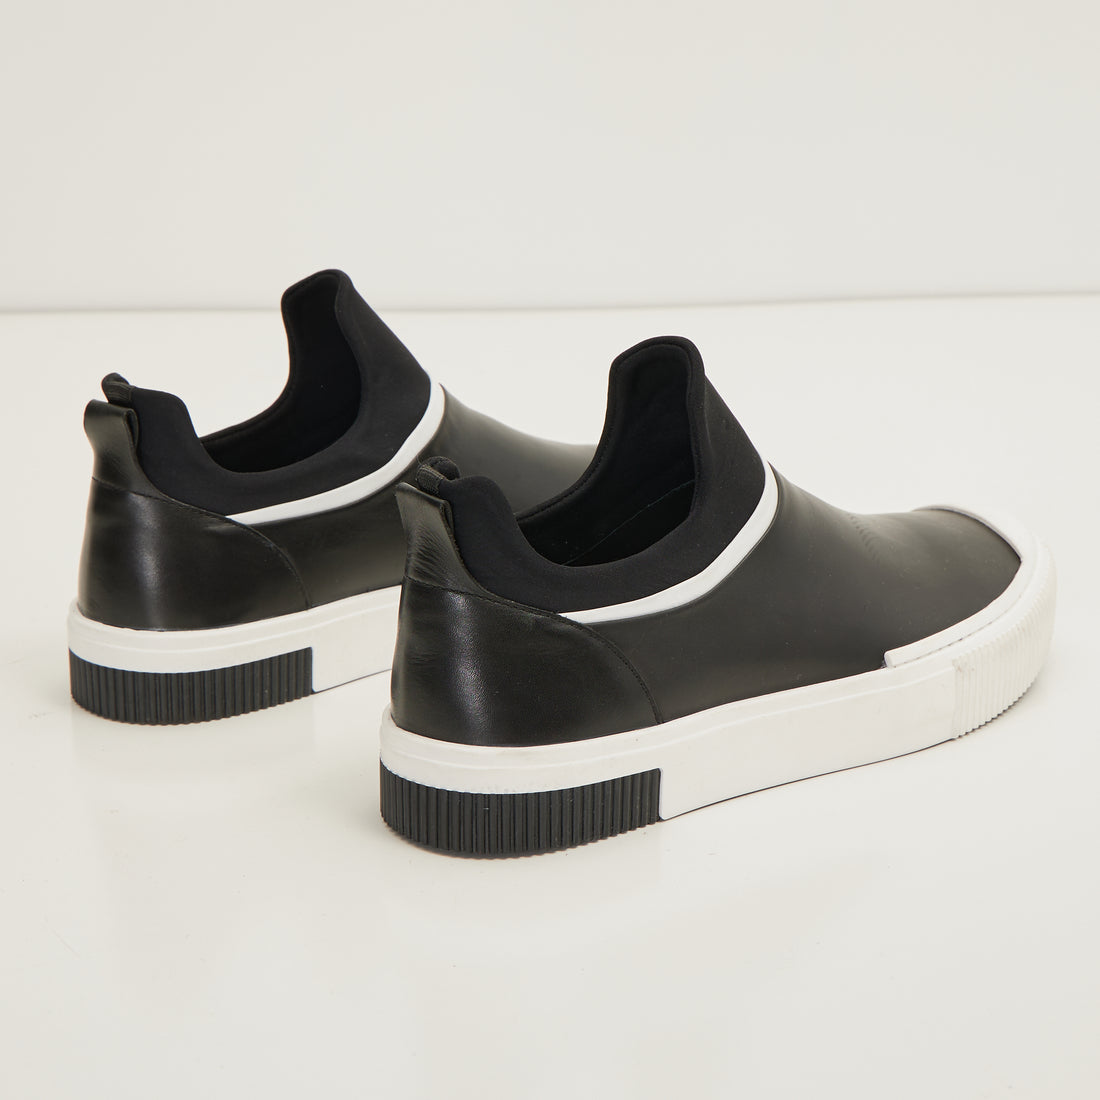 N° D2166T ''THE KING'' LEATHER SKATE SLIP ONS - NEOPRENE AND LEATHER BLACK